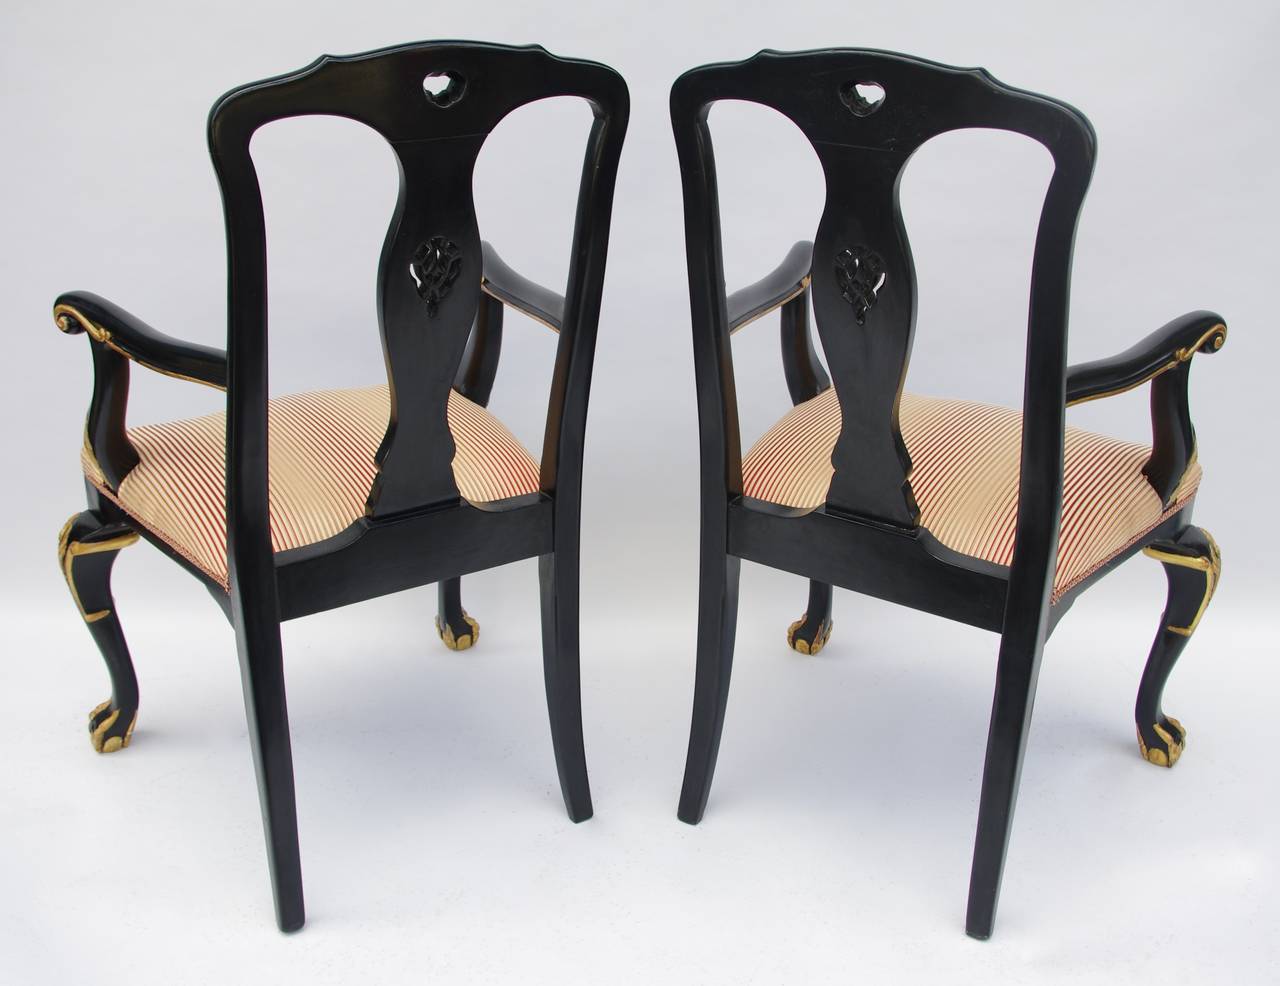 Pair of Chippendale style carved and black lacquered wood armchairs standing on two back saber legs and two front claw and ball legs, characteristic of the Chippendale style. Rectangular and openwork backrest with flared uprights. Gilt highlights